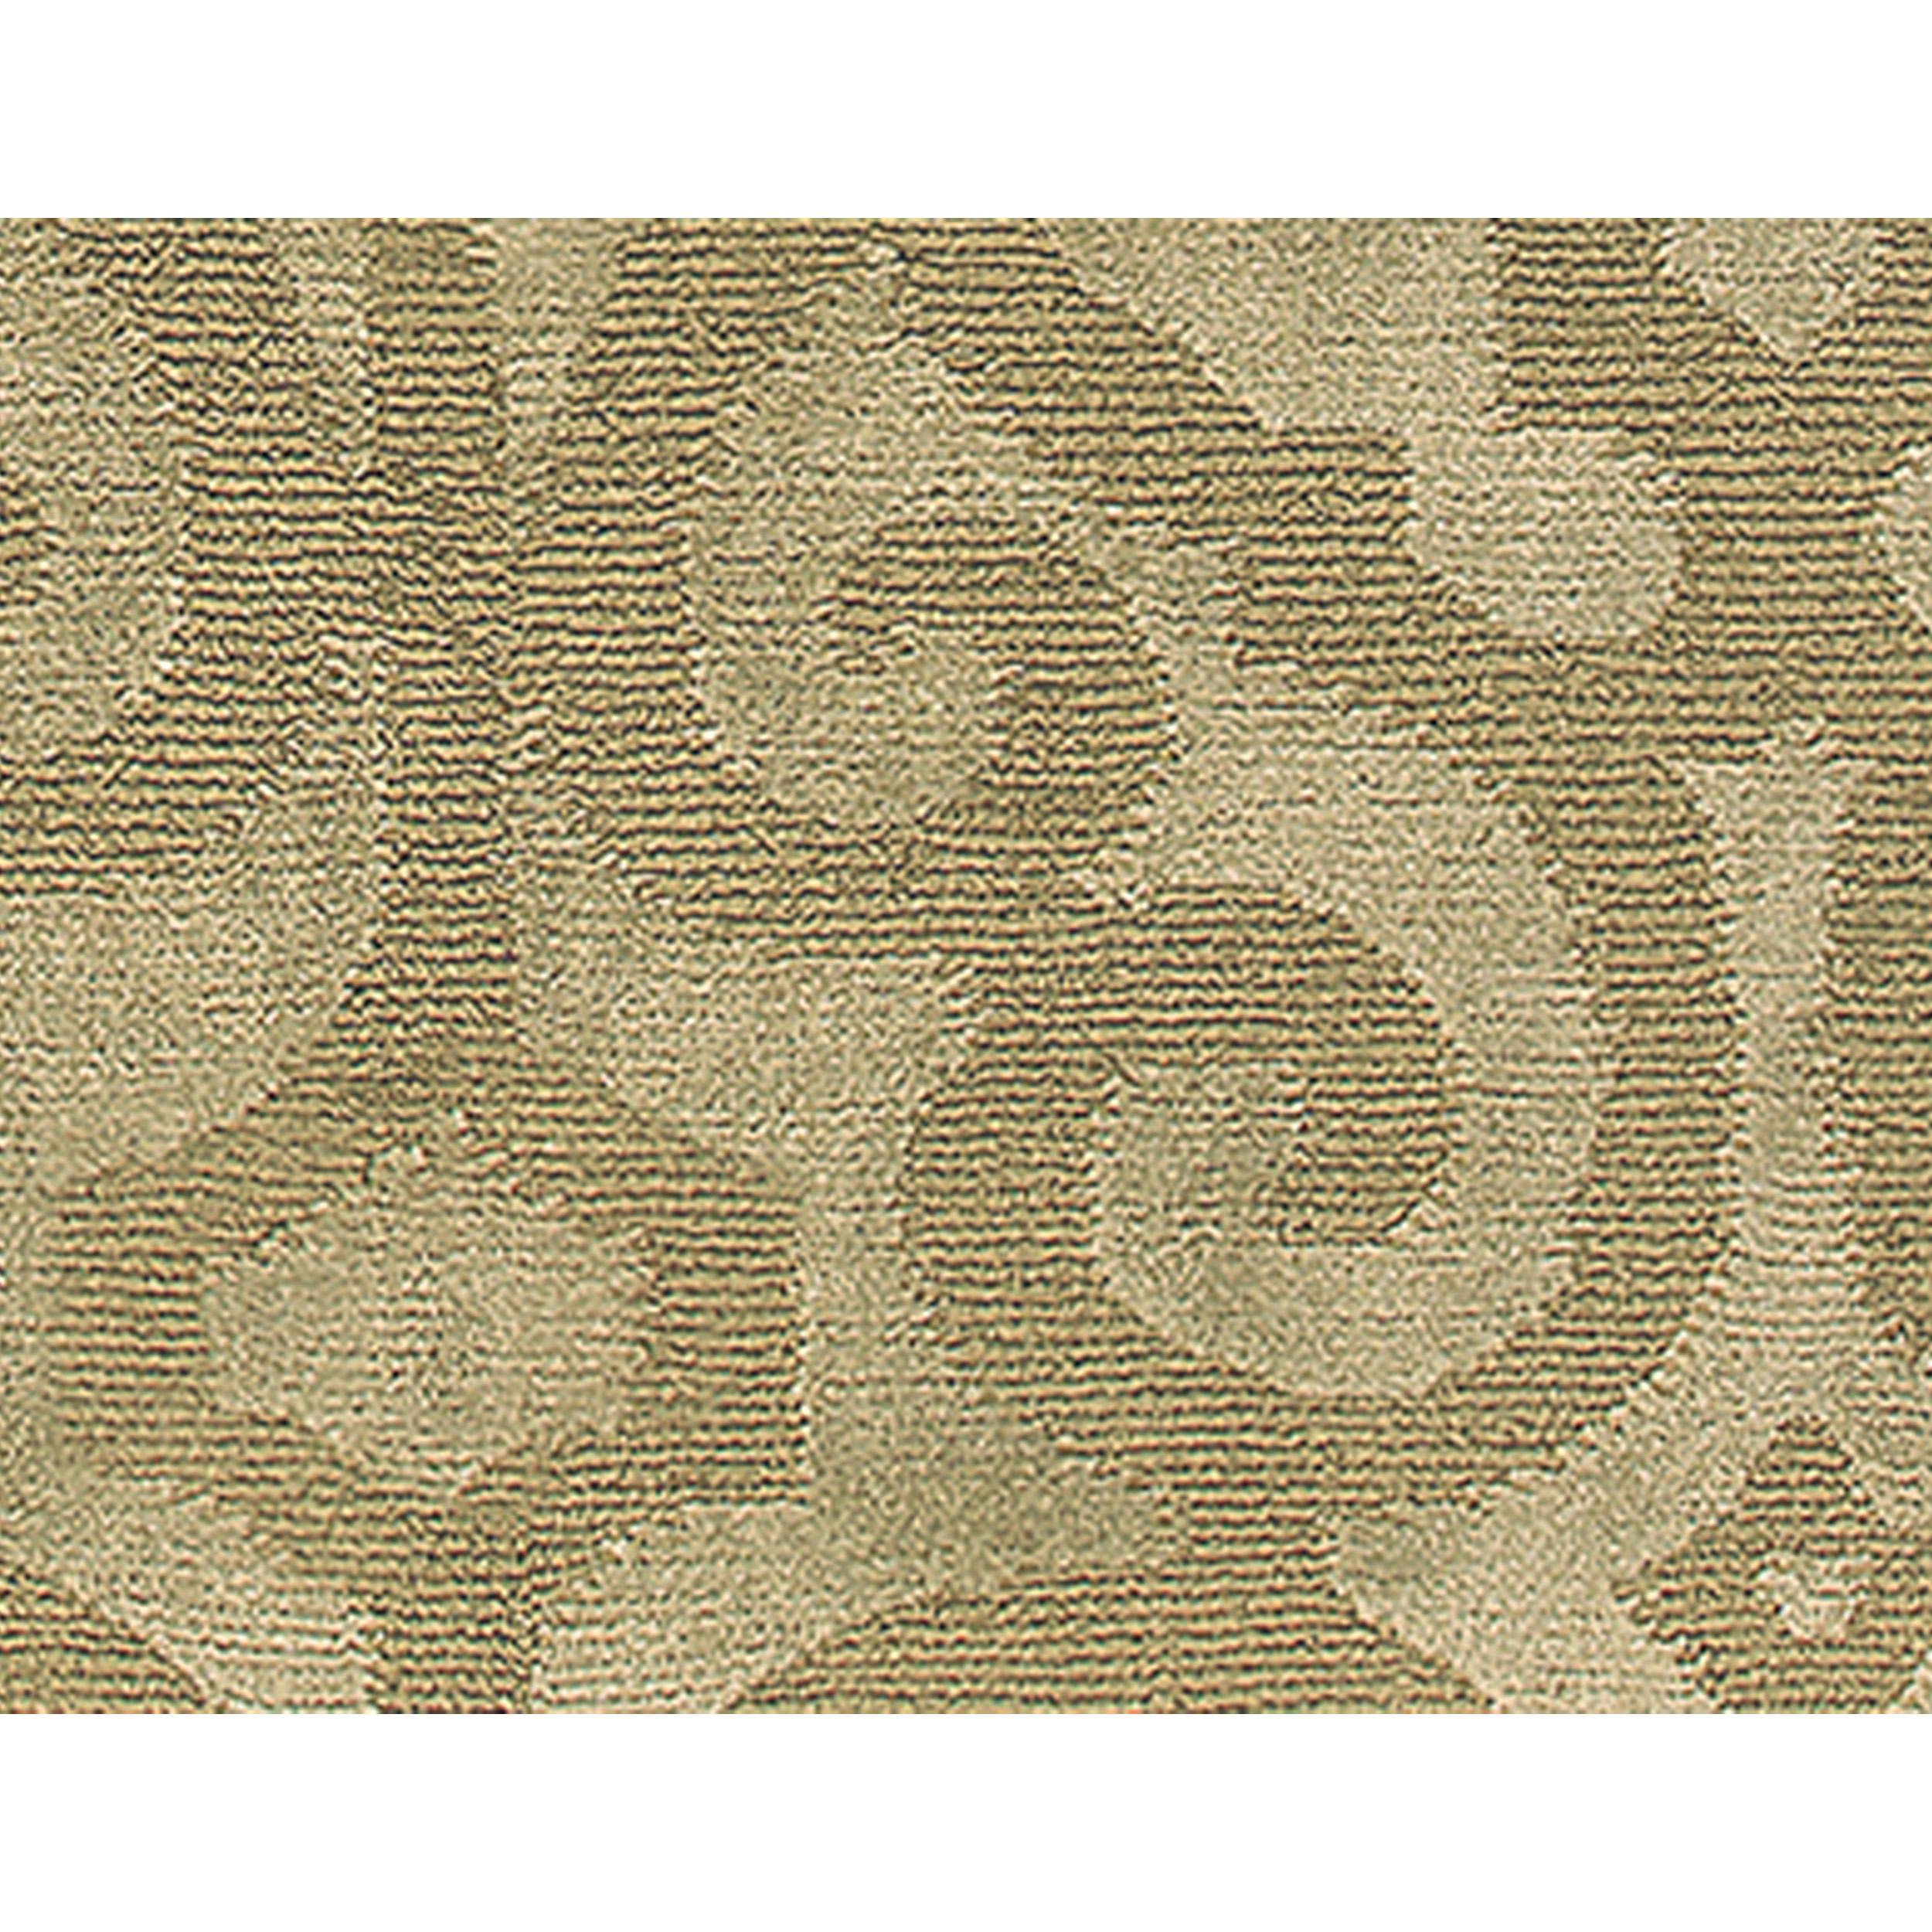 Luxury Modern Hand-Knotted Samba Grasshopper 10x14 Rug In New Condition For Sale In Secaucus, NJ